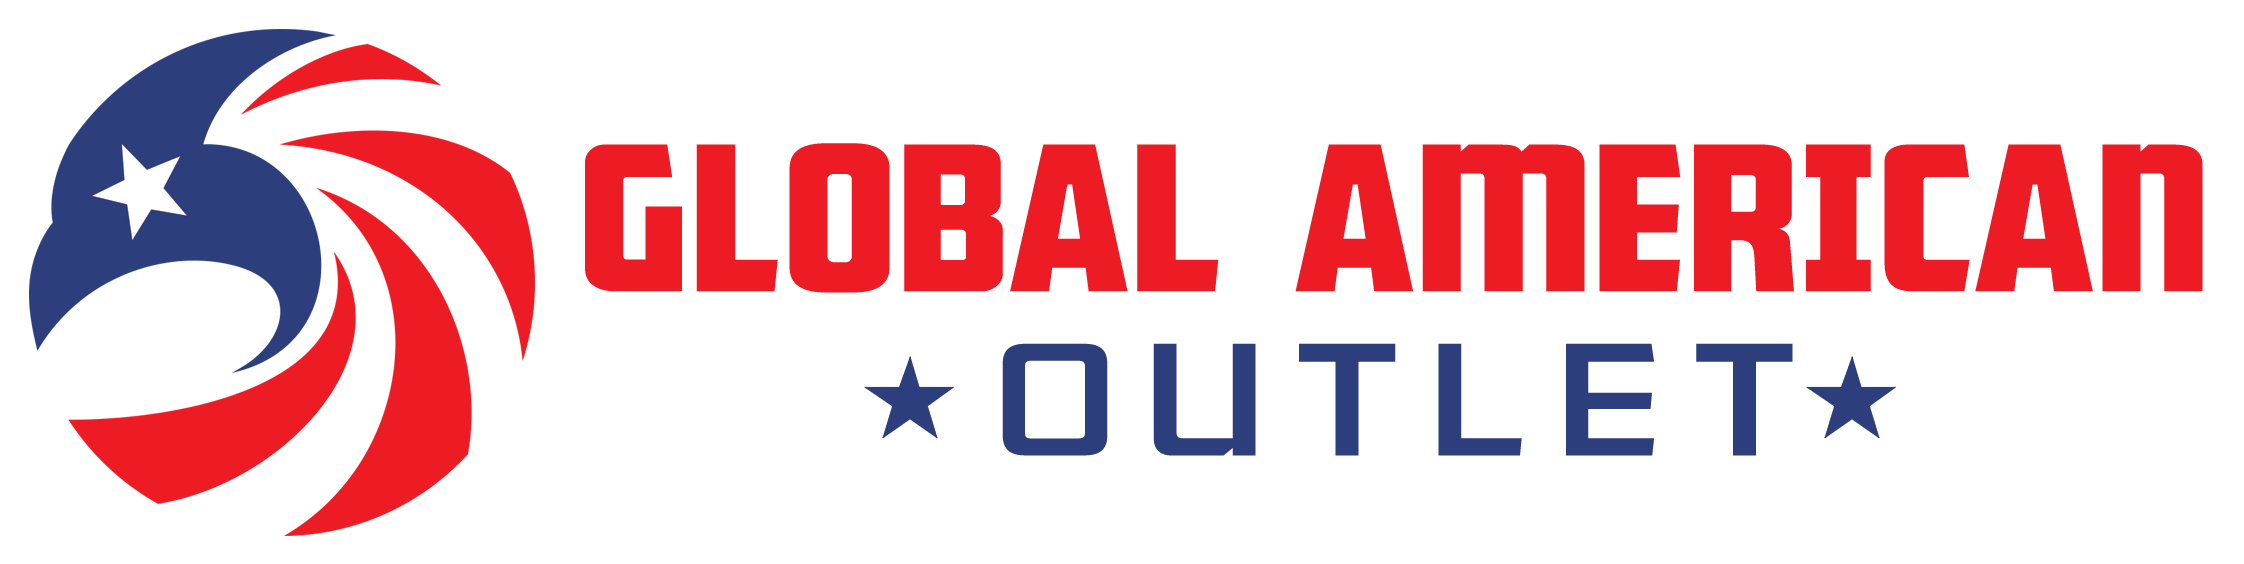 Global American Outlet